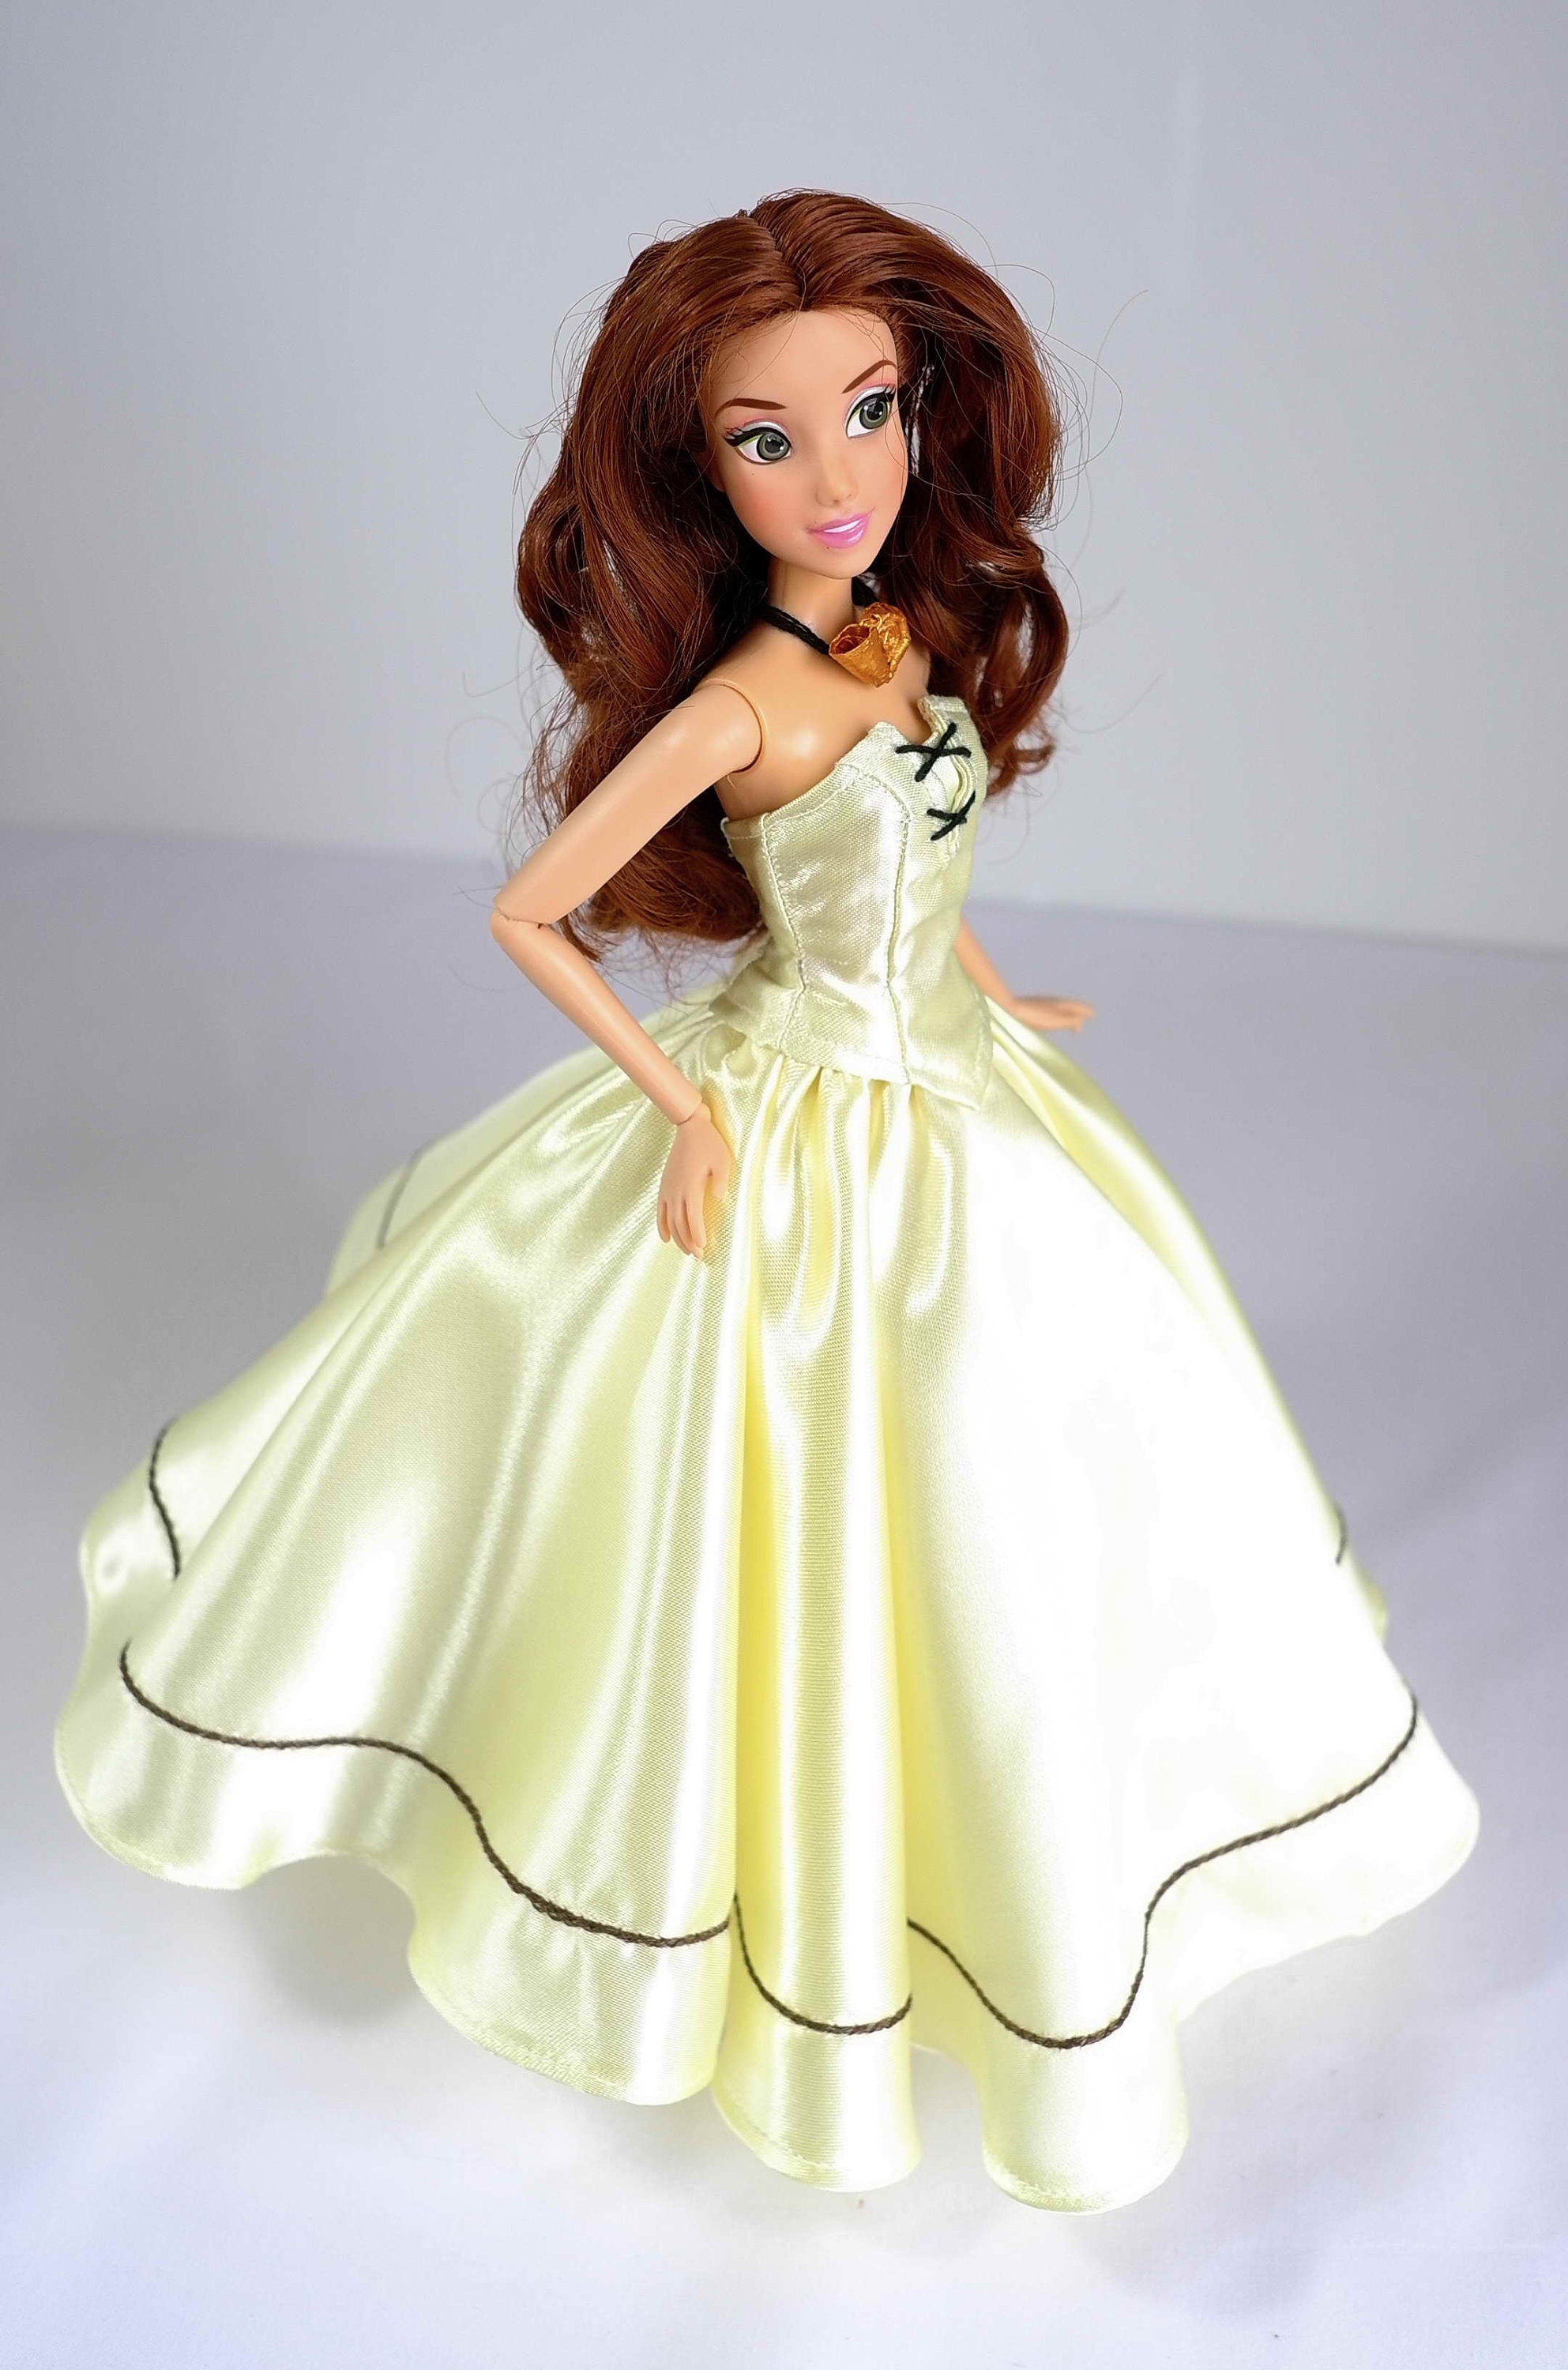 Pepa Inspired Outfit Fits 11.5 Inches or 17 Inches Dolls Like Disney  Princess Classic Dolls or Classic Singing Dolls. 